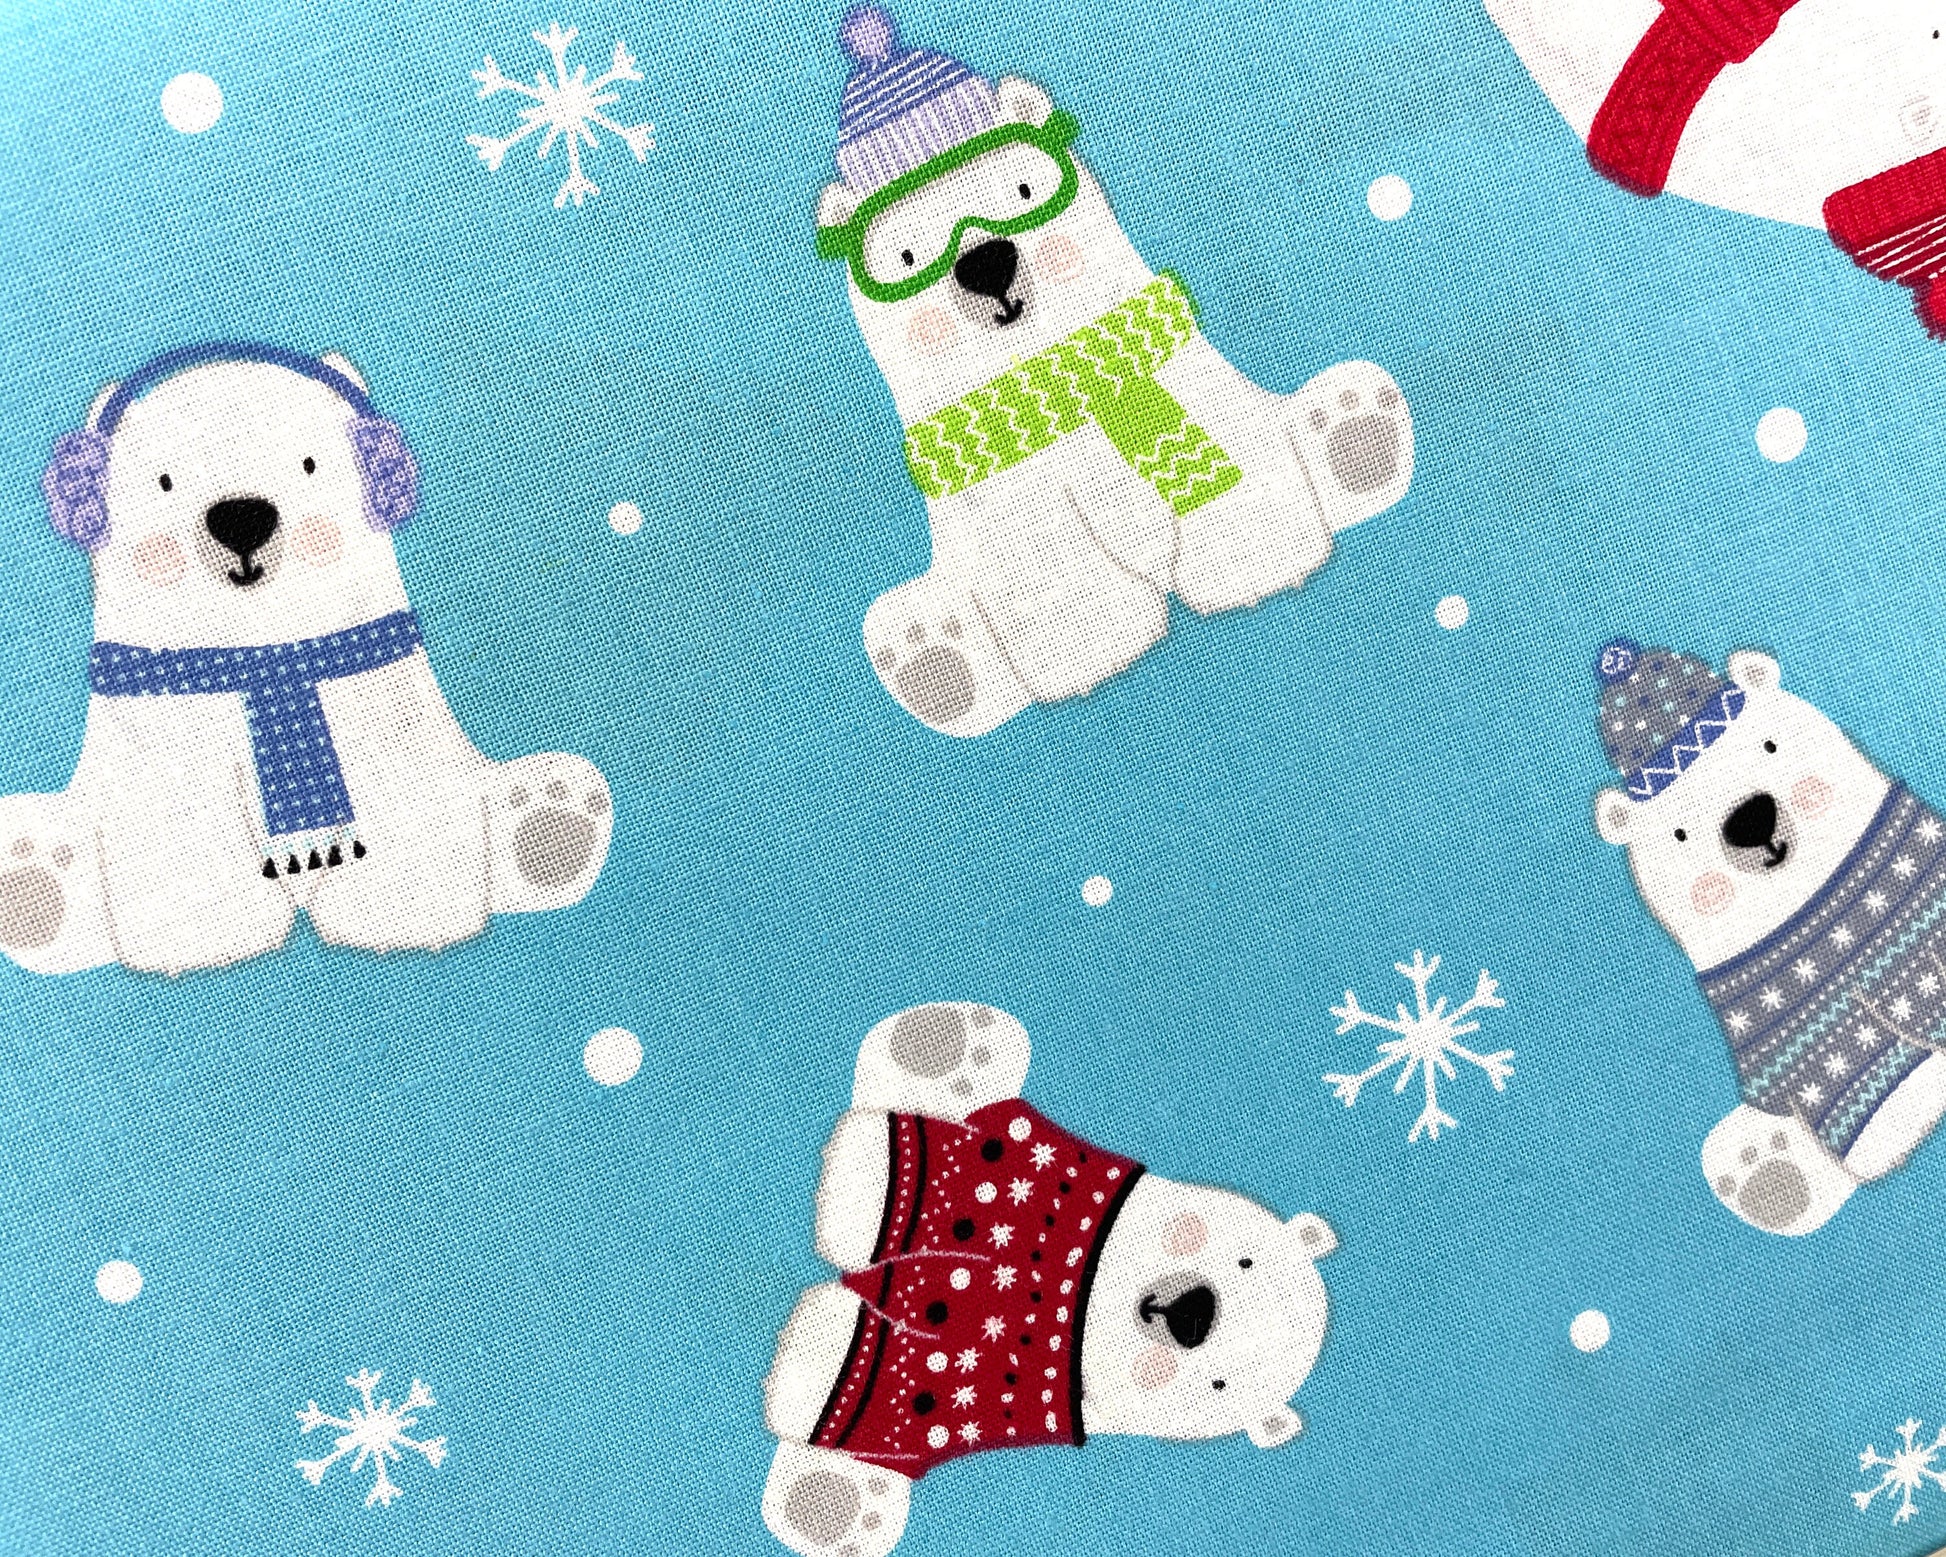 Polar Bear Express in Turquoise by Kanvas Studio - 100% cotton fabric - Christmas Winter Holiday Polar Bears in Sweaters - SHIPS NEXT DAY